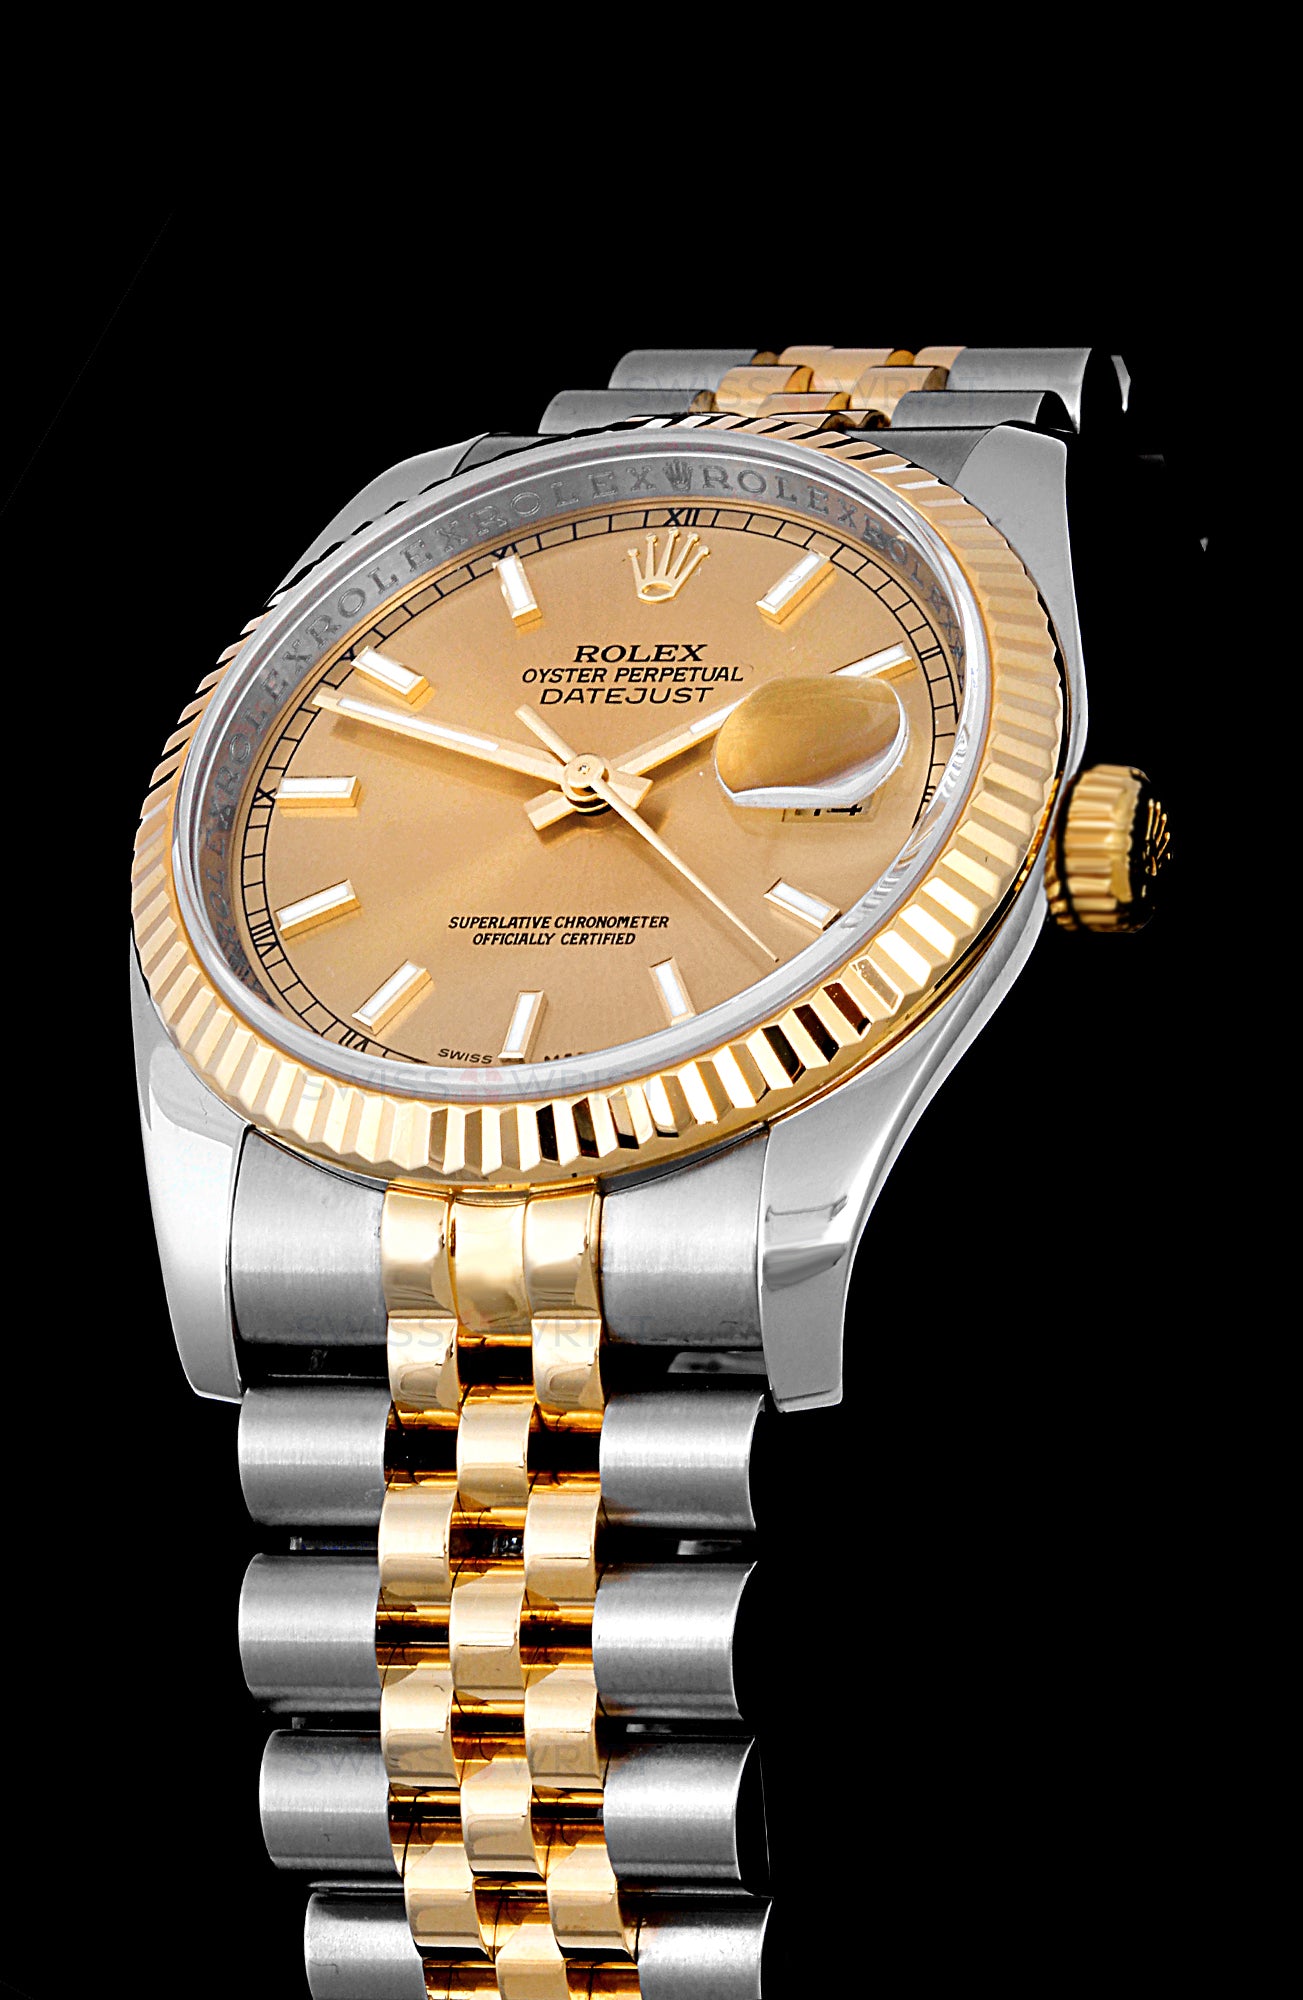 Rolex Watches Official Site | peacecommission.kdsg.gov.ng